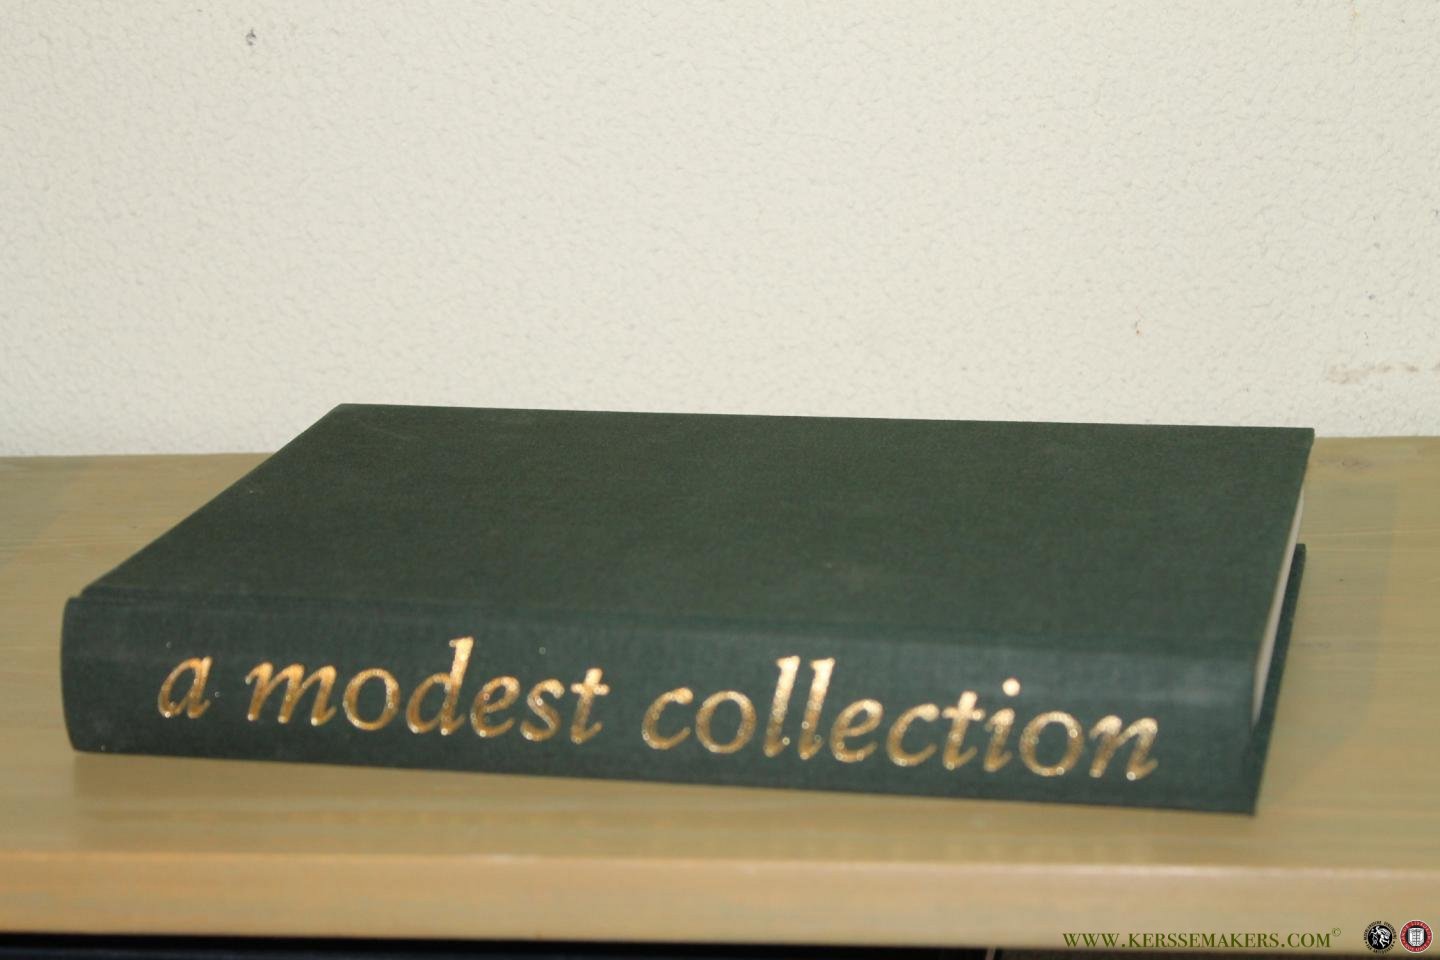 CHAMBERS, David - A Modest Collection. Private Libraries Association, 1956-2006.